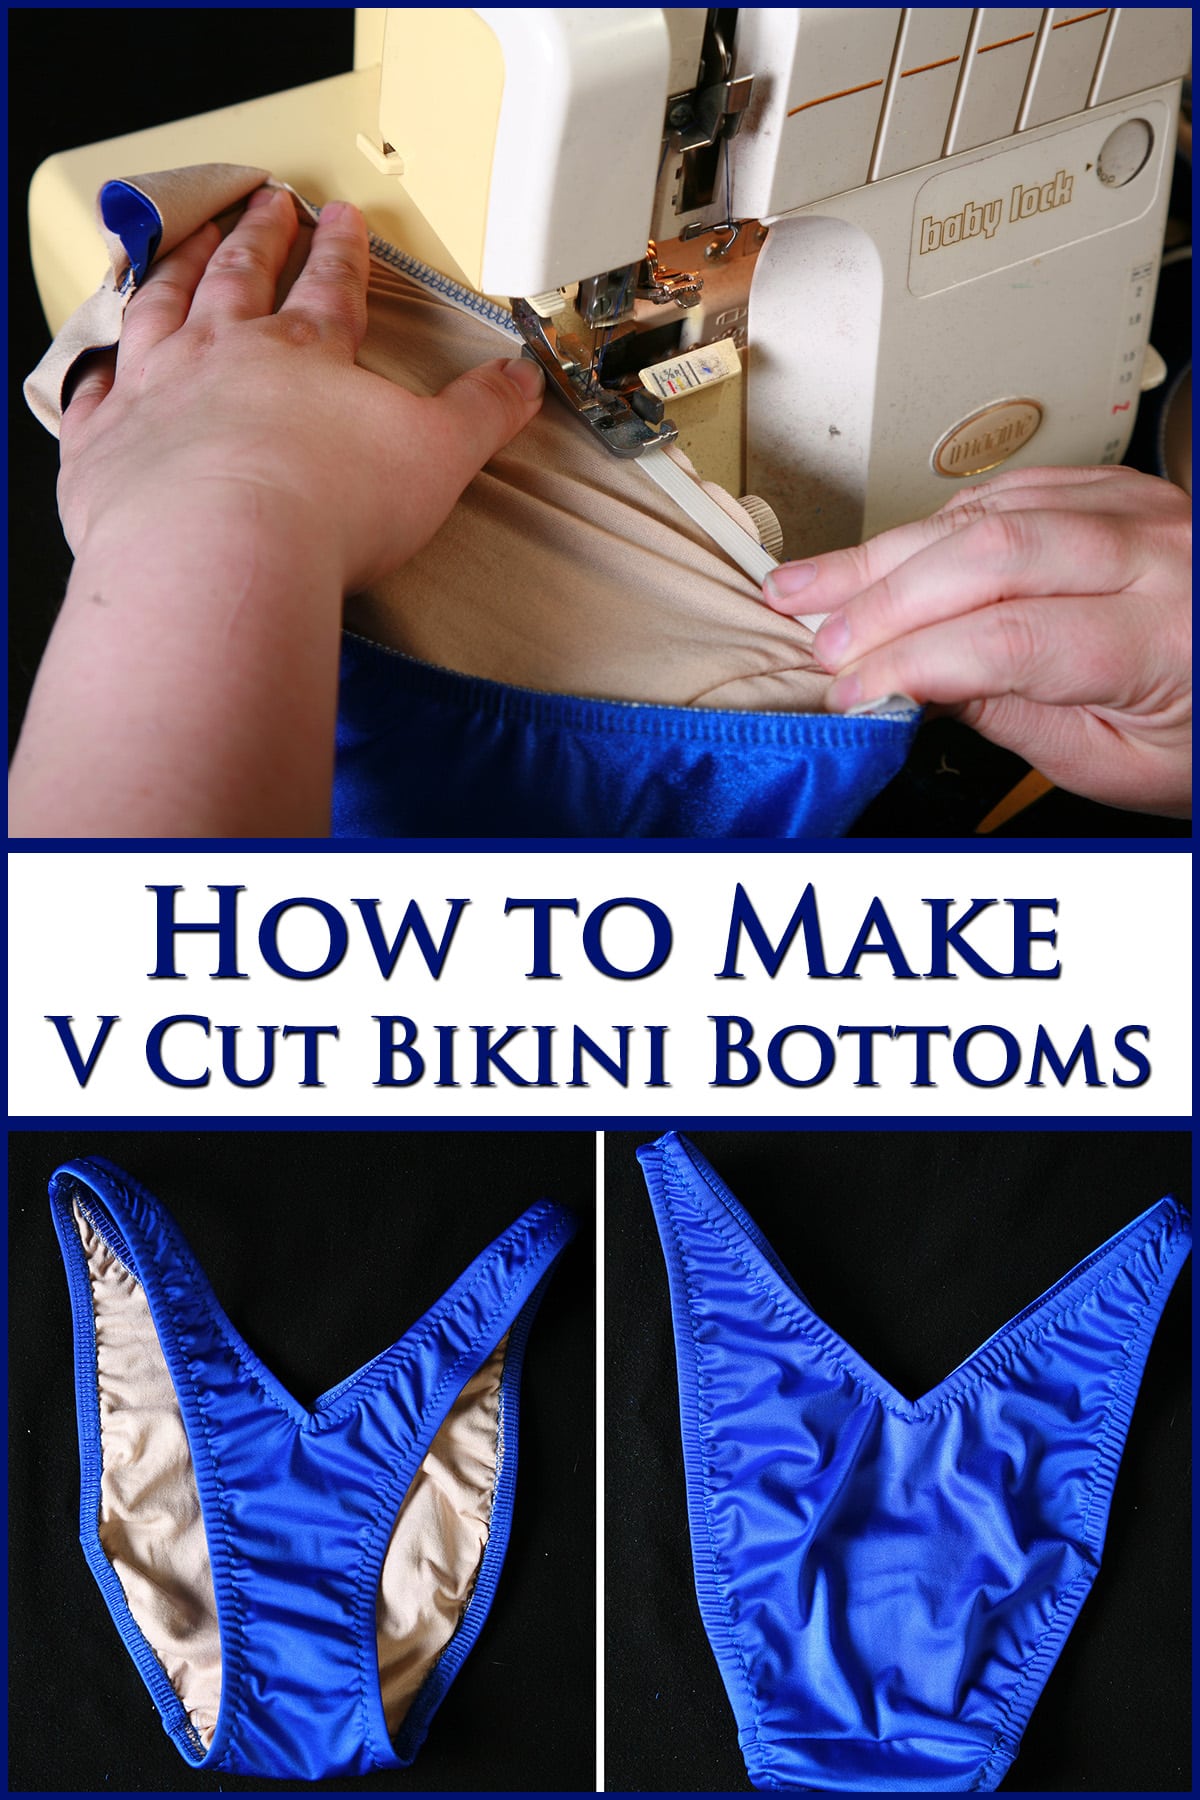 Front and back views of a blue V cut bikini bottom, on a black backdrop, as well as hands guiding the garment through a sewing machine. Blue text between the two images says how to make v cut bikini bottoms.